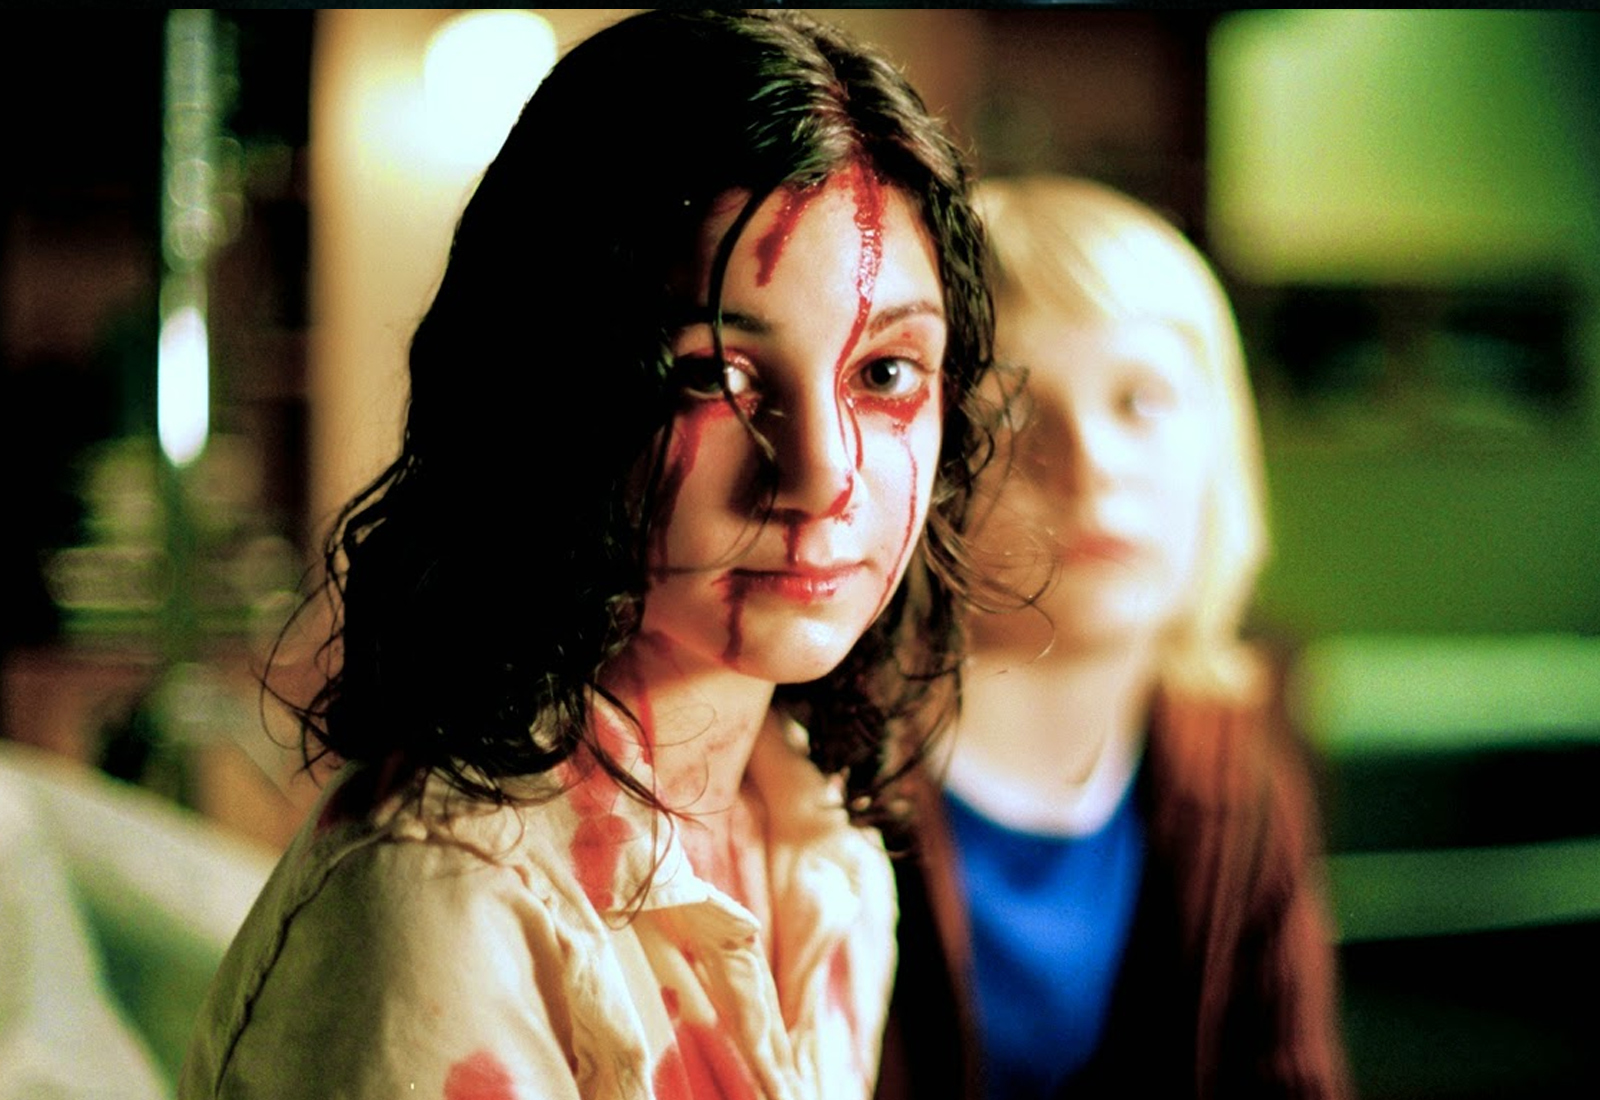 Eli with blood all over her, and Oskar in the background